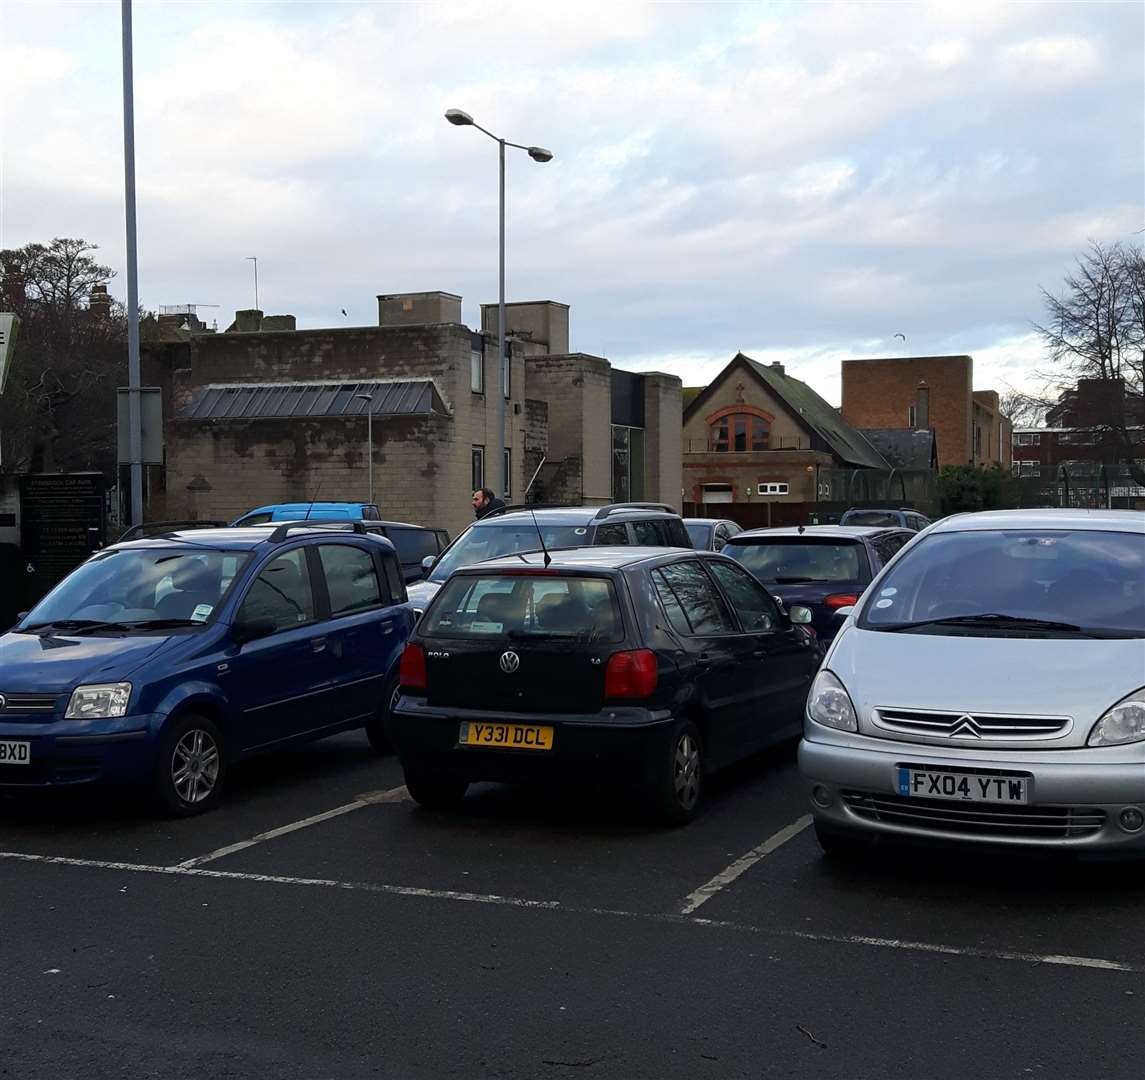 Stembrook Car Park, Dover. The pandemic has meant most costs won't rise